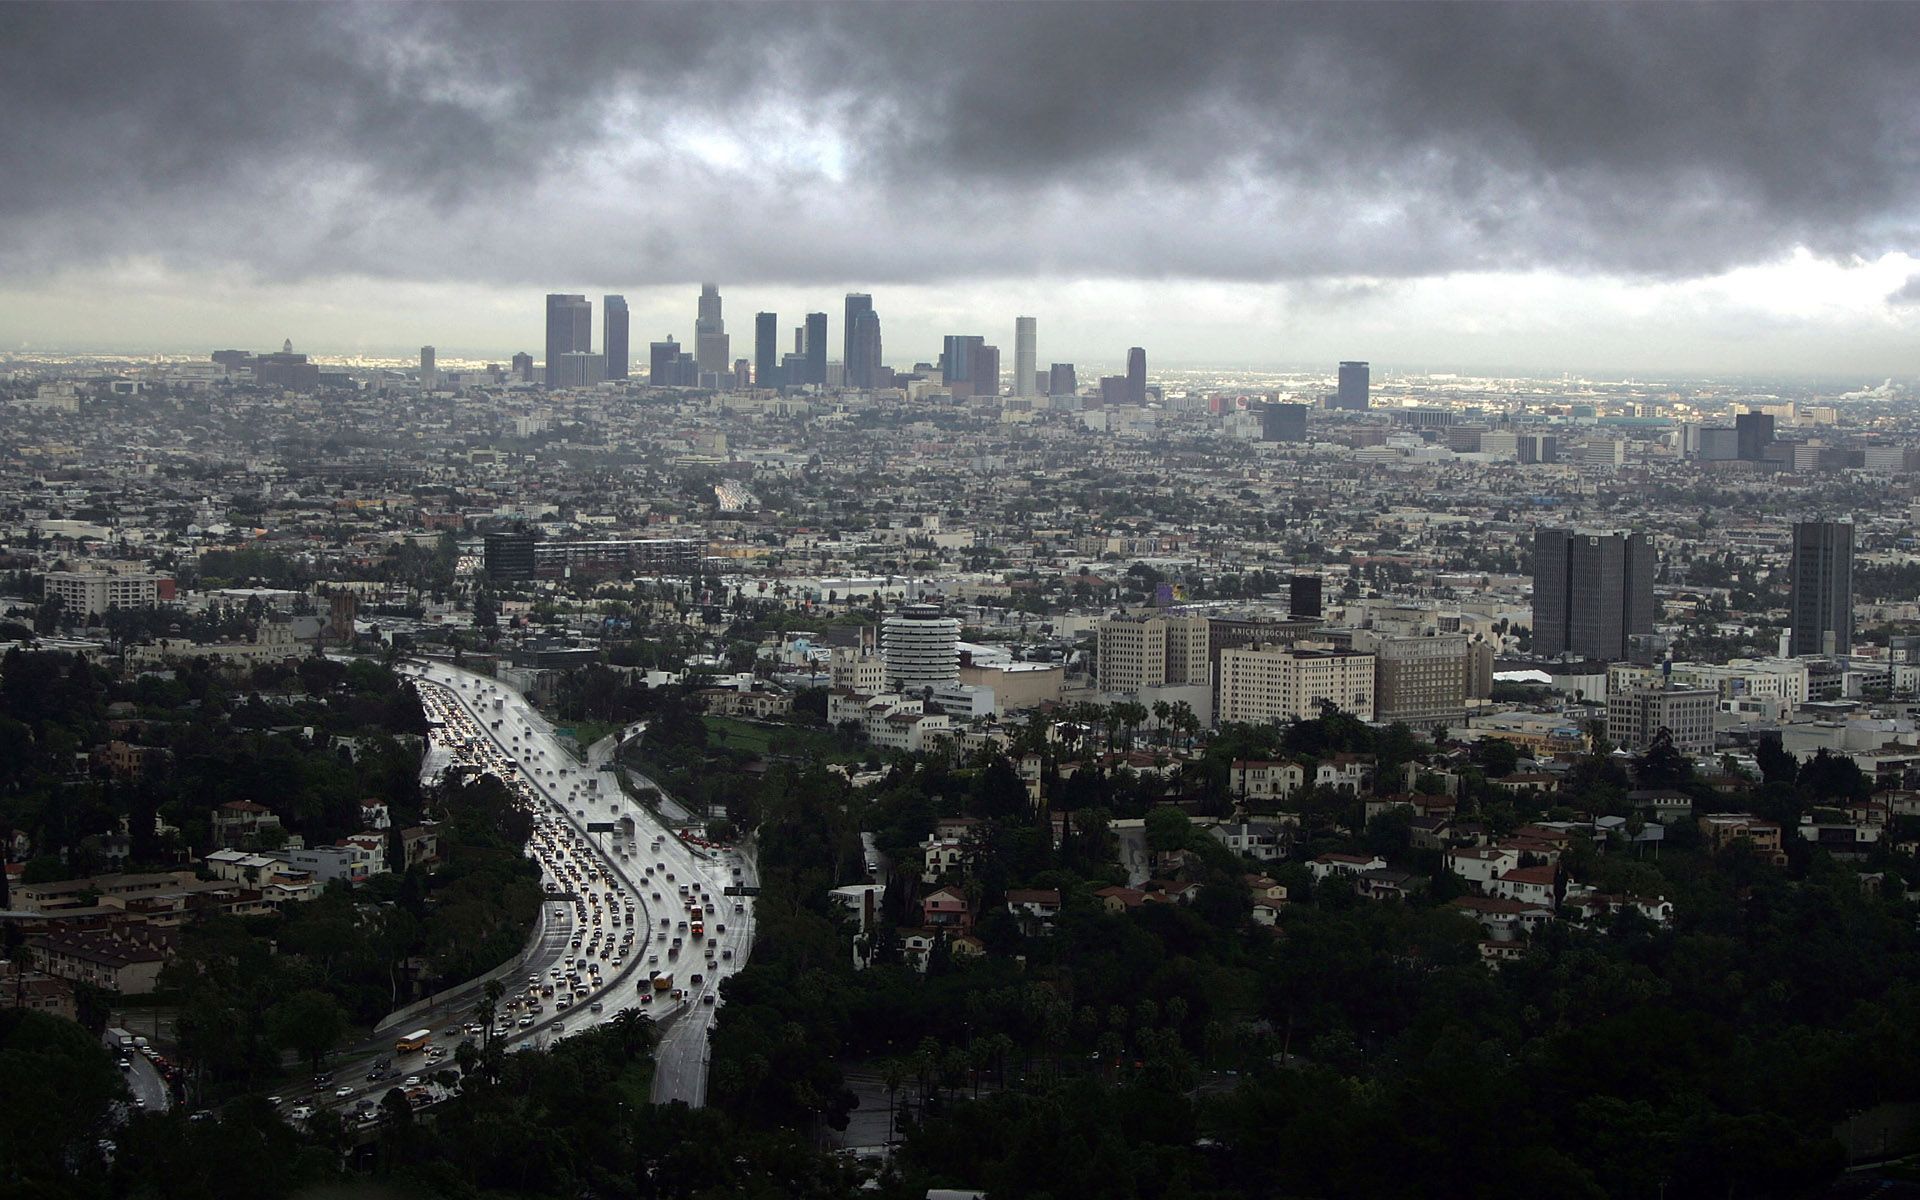 Los Angeles HD Wallpaper | Los Angeles Images | Cool Wallpapers